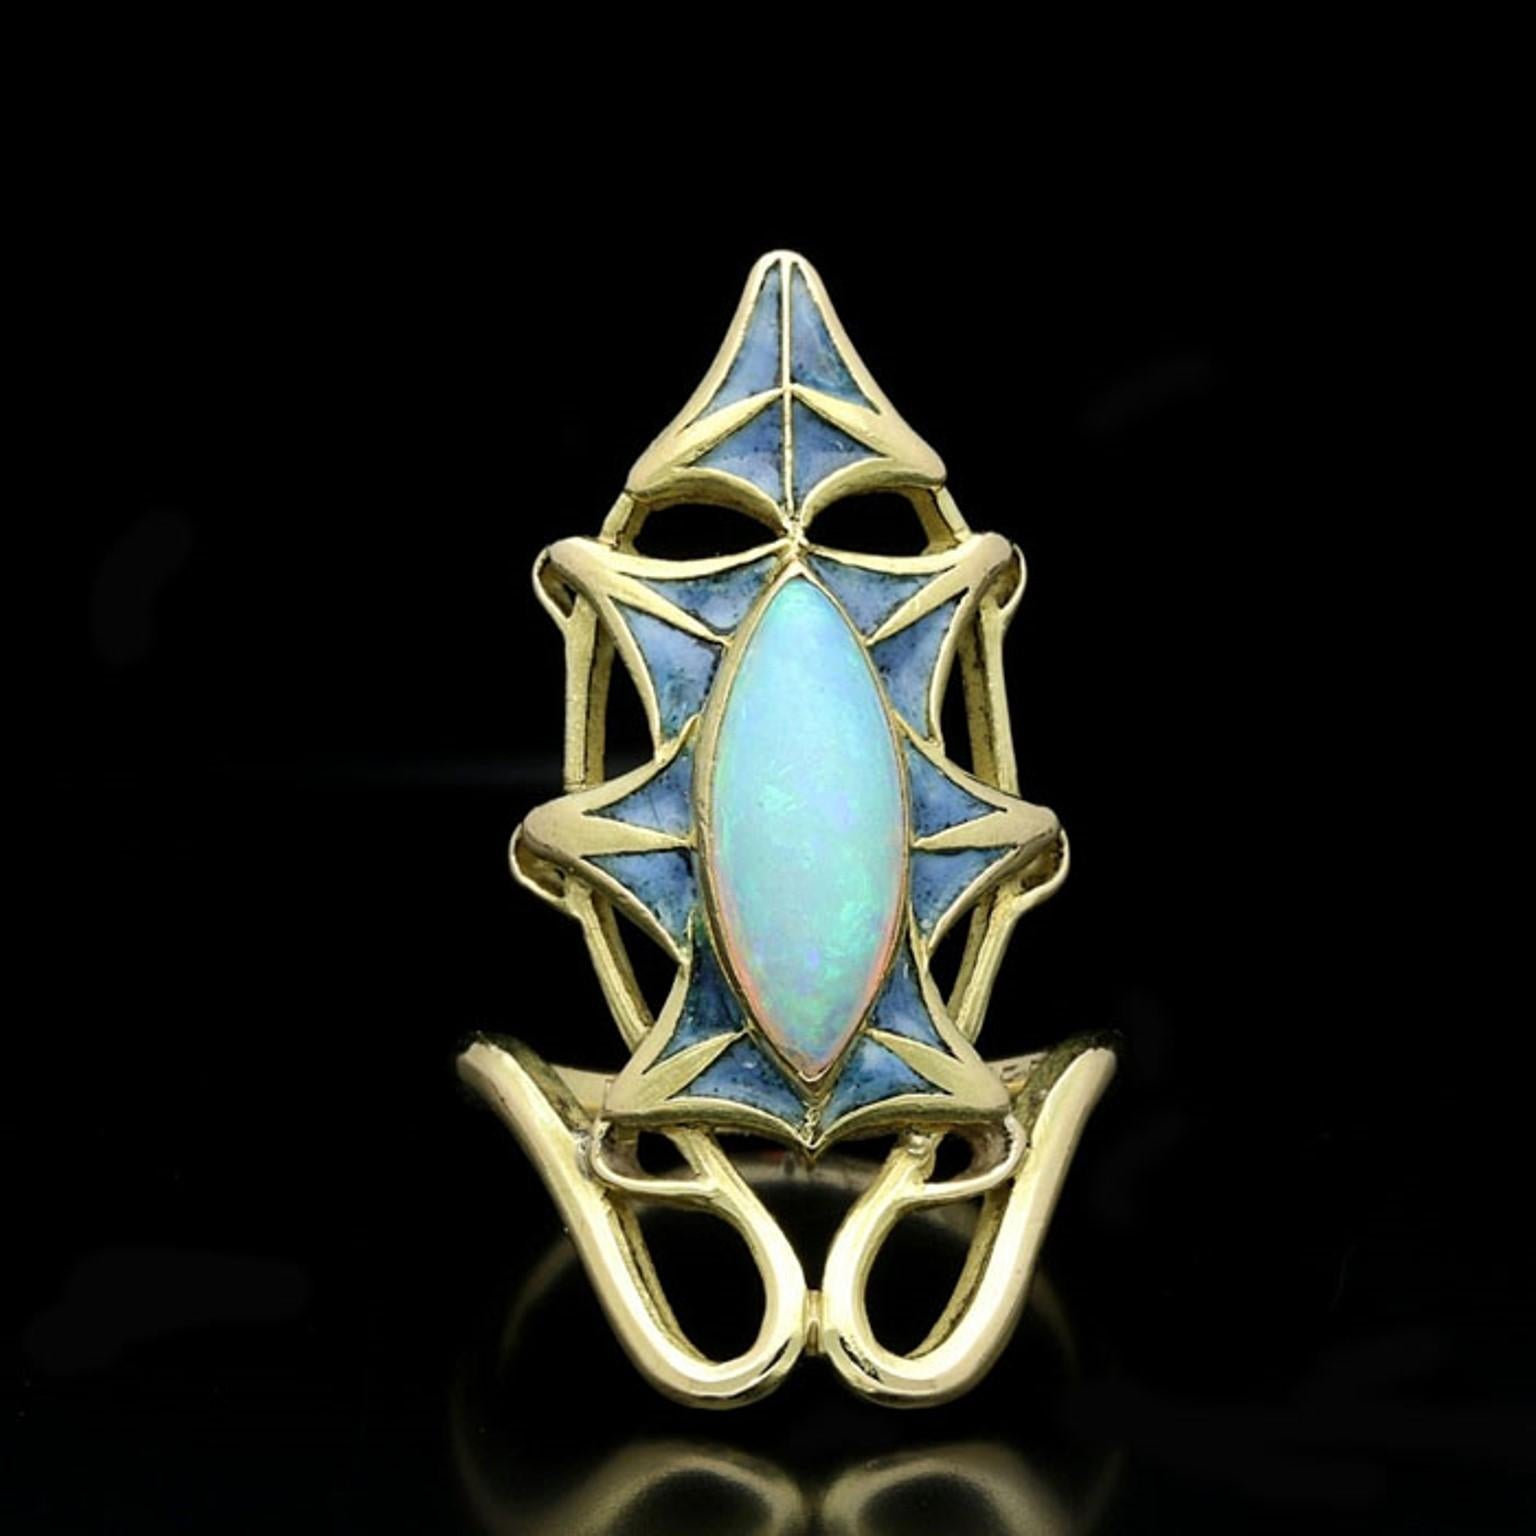 A marquise shaped opal estimated to weigh approximately 0.6cts
18ct yellow gold, signed LALIQUE
Engraved with the name Roger and the date 22 Fevrier 1899
UK finger size G, US 3 3/4
5.3 grams

A rare and attractive ring designed as a sinuous gold